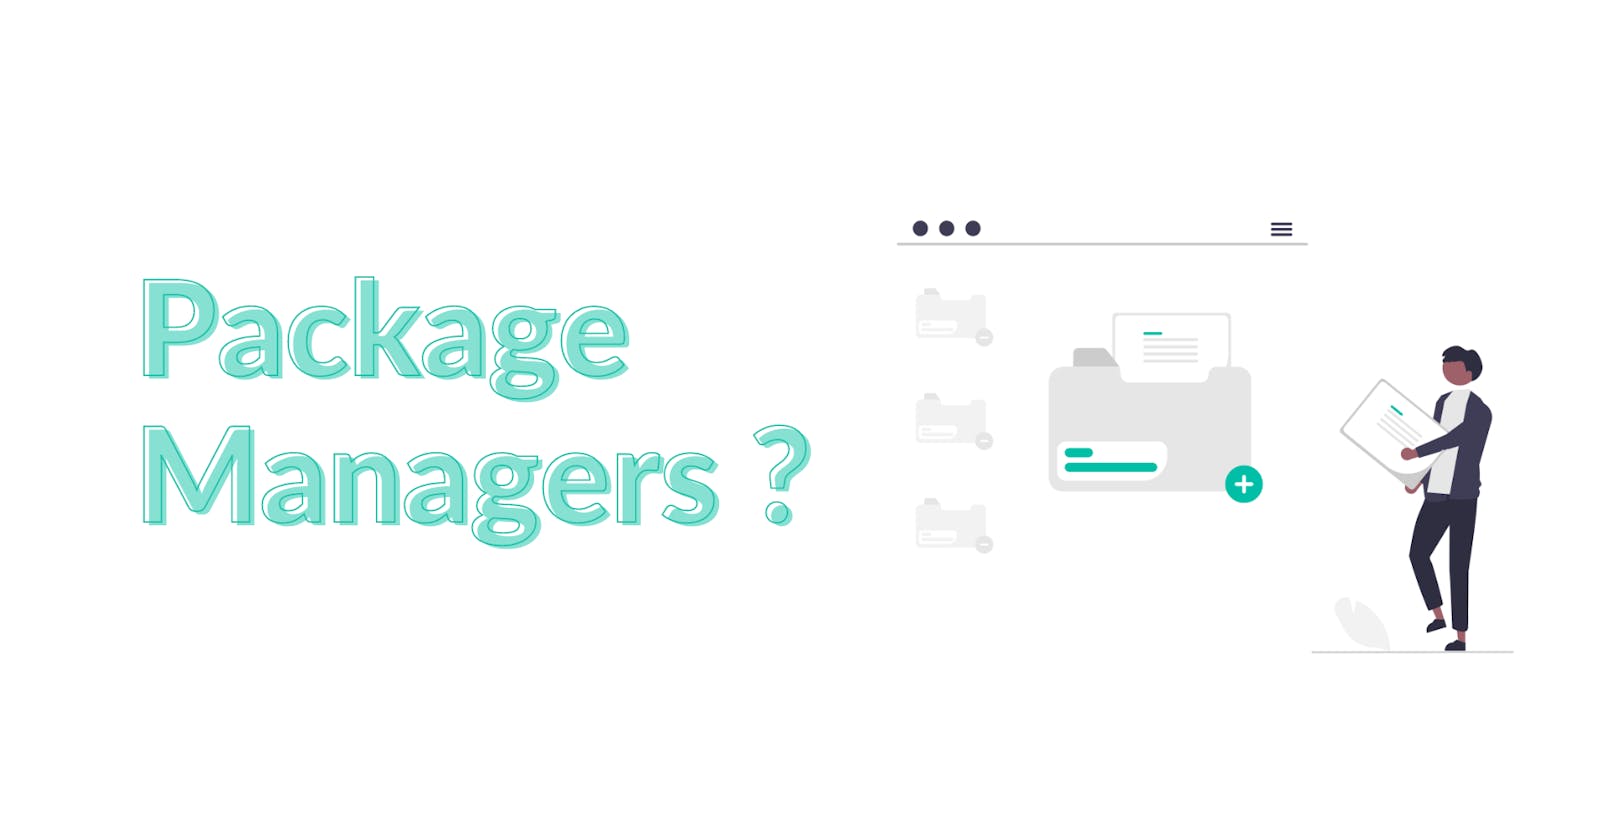 Why are Package Managers Important?